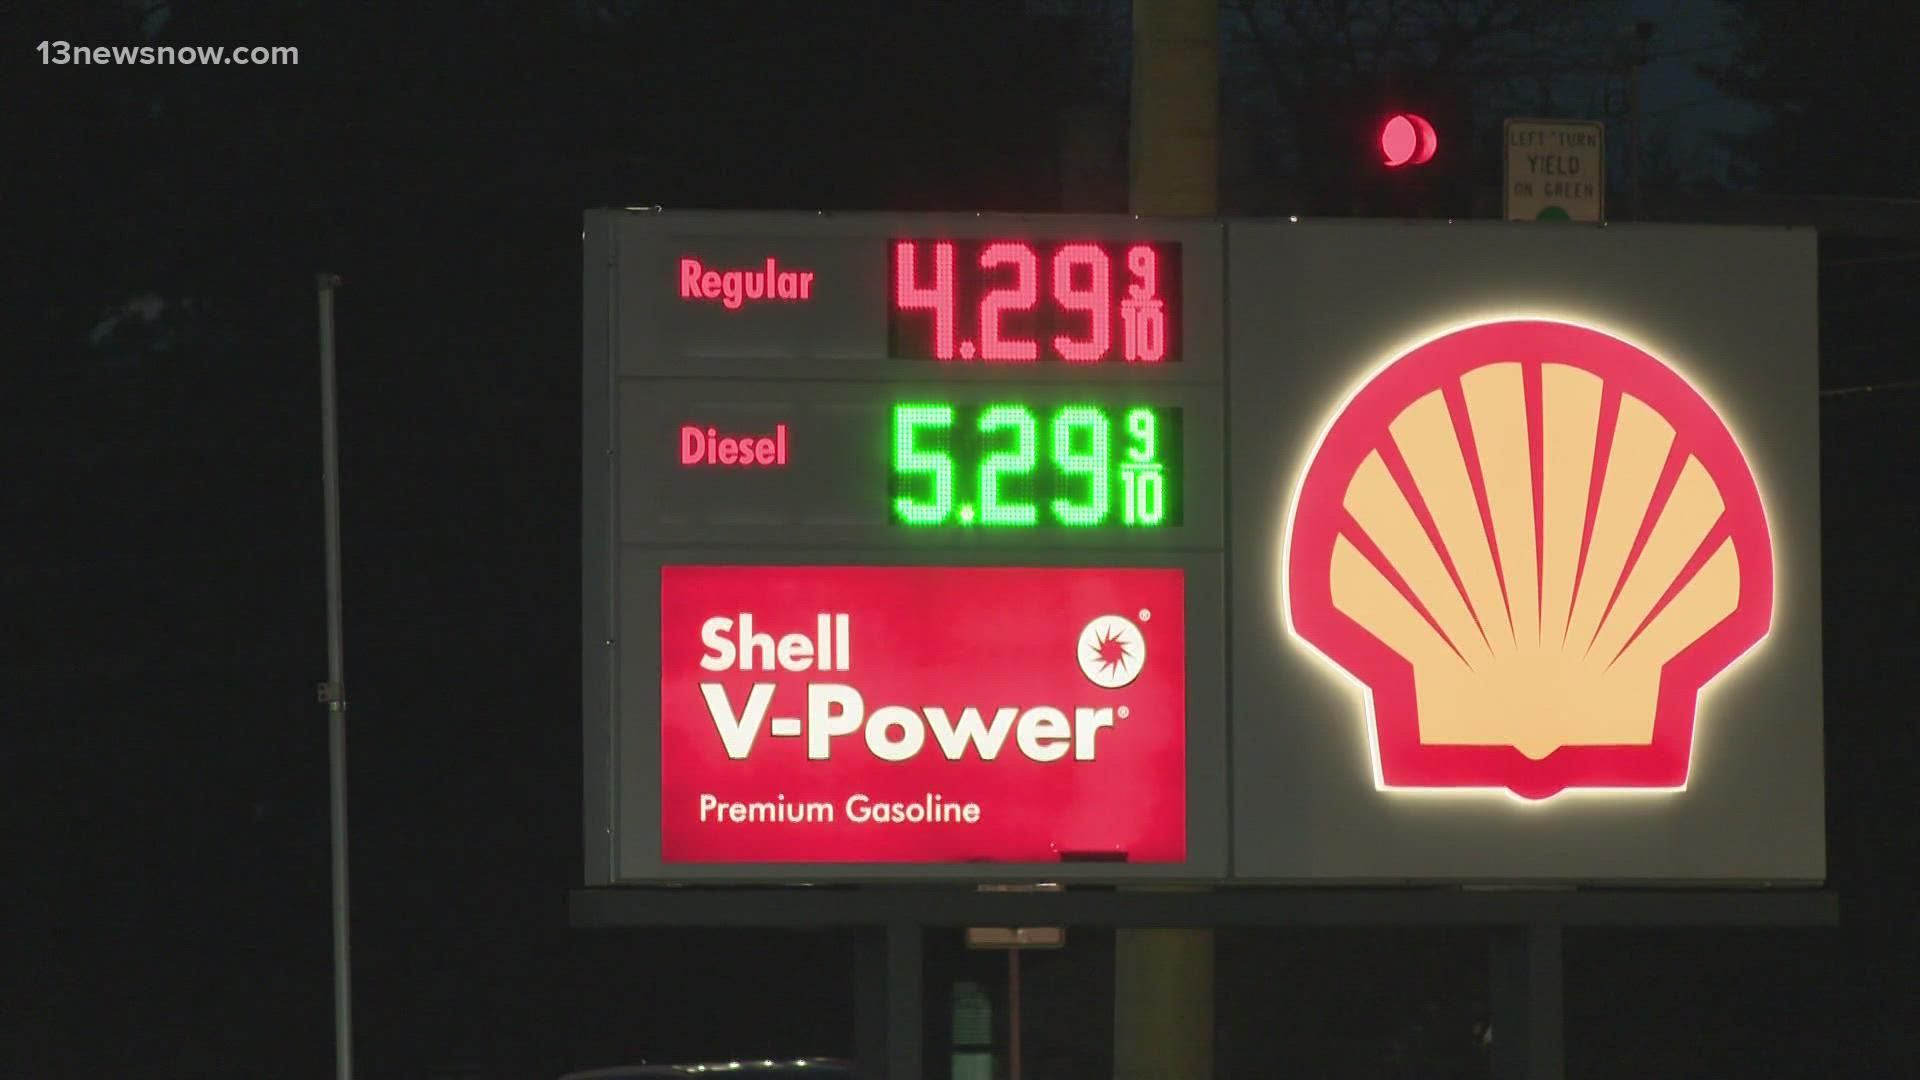 Virginia Beach has some of the highest gas prices in Hampton Roads, according to GasBuddy.